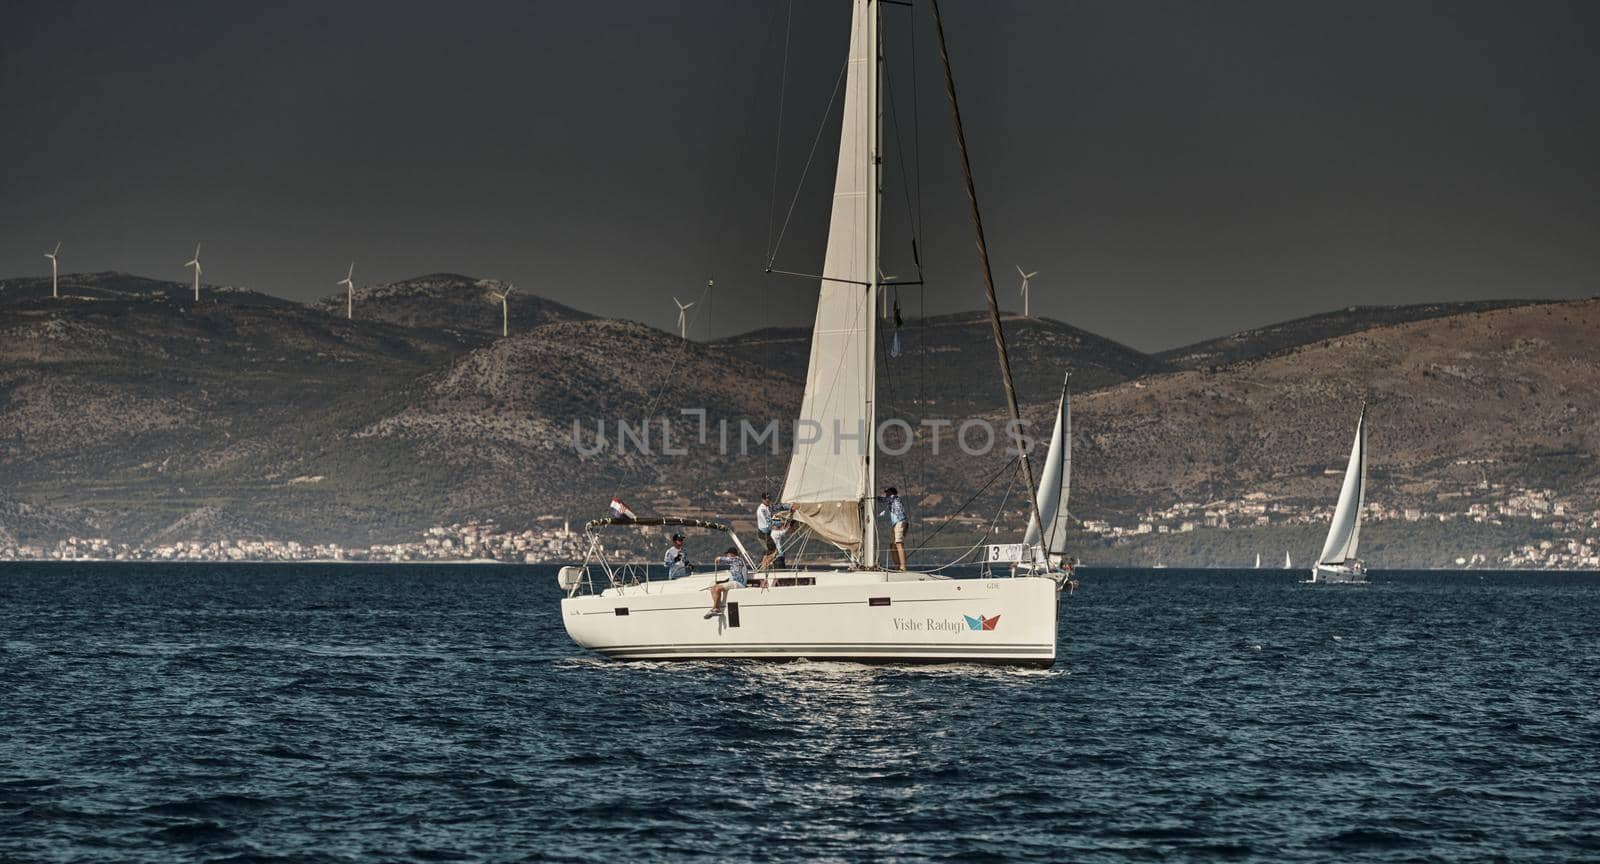 Croatia, Adriatic Sea, 15 September 2019: The race of sailboats, a regatta, reflection of sails on water, Intense competition, bright colors, island with windmills are on background by vladimirdrozdin